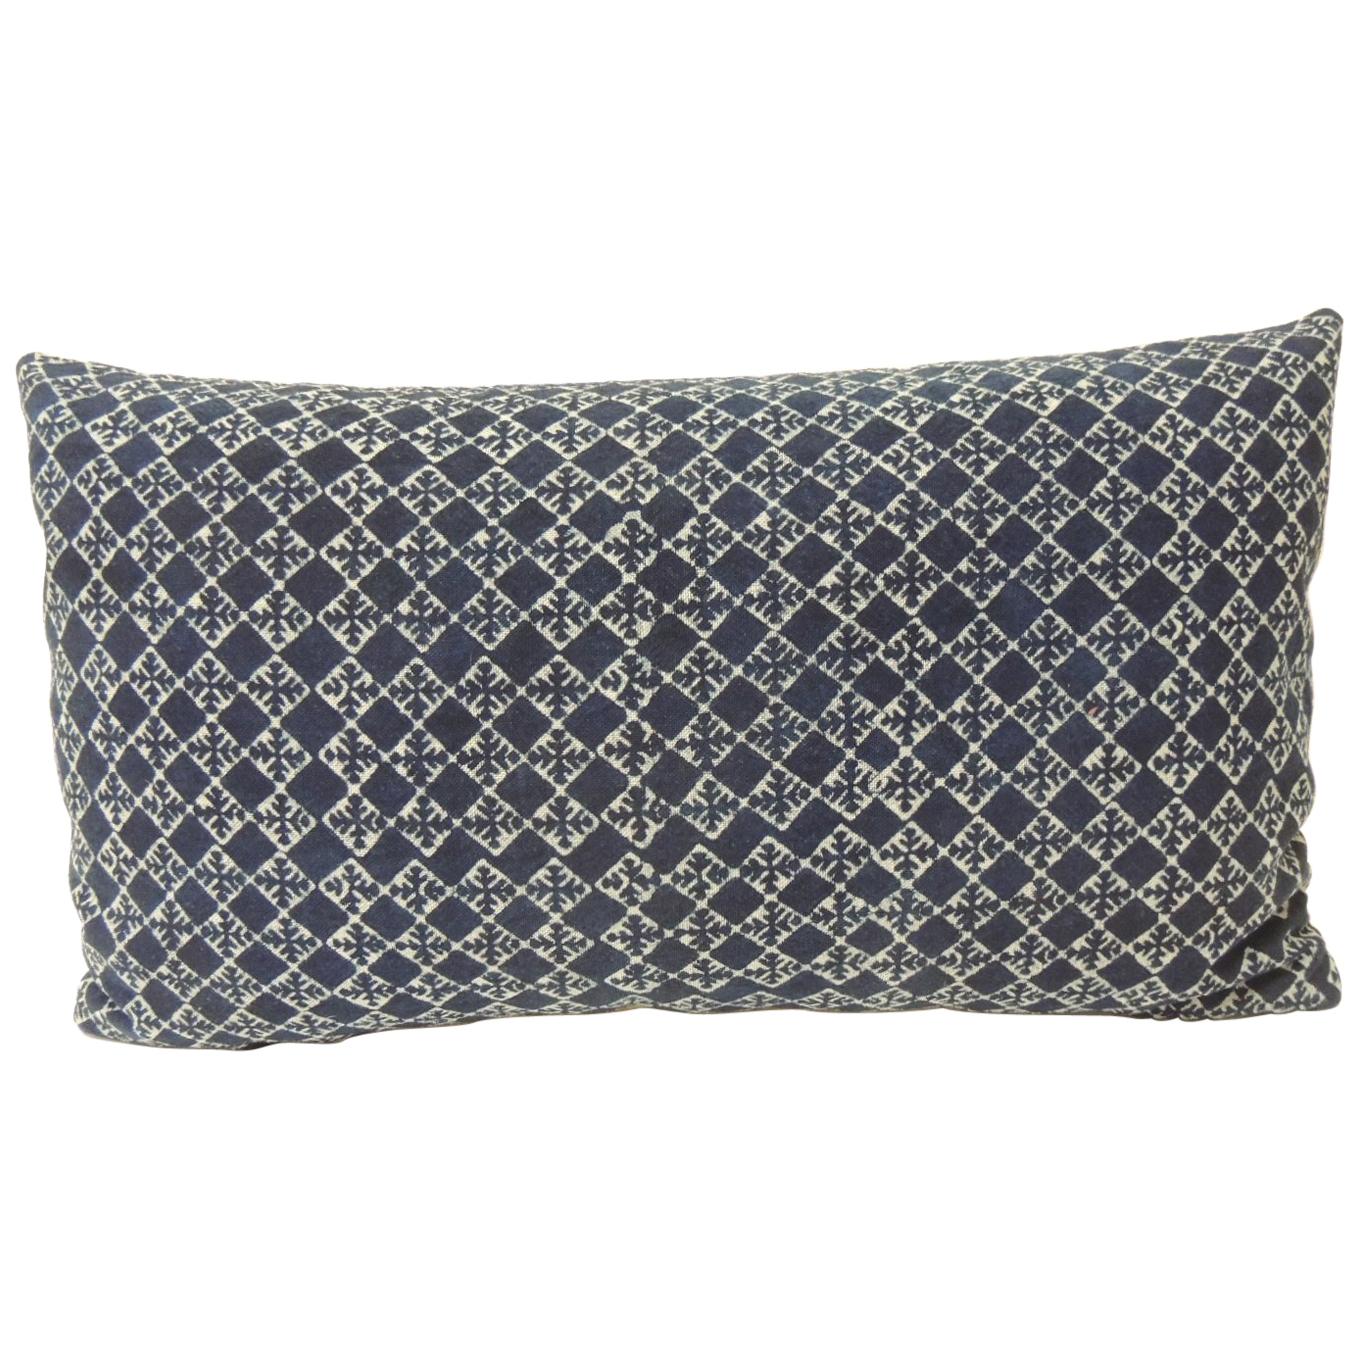 Vintage Blue and White Hand-Blocked Decorative Lumbar Pillow